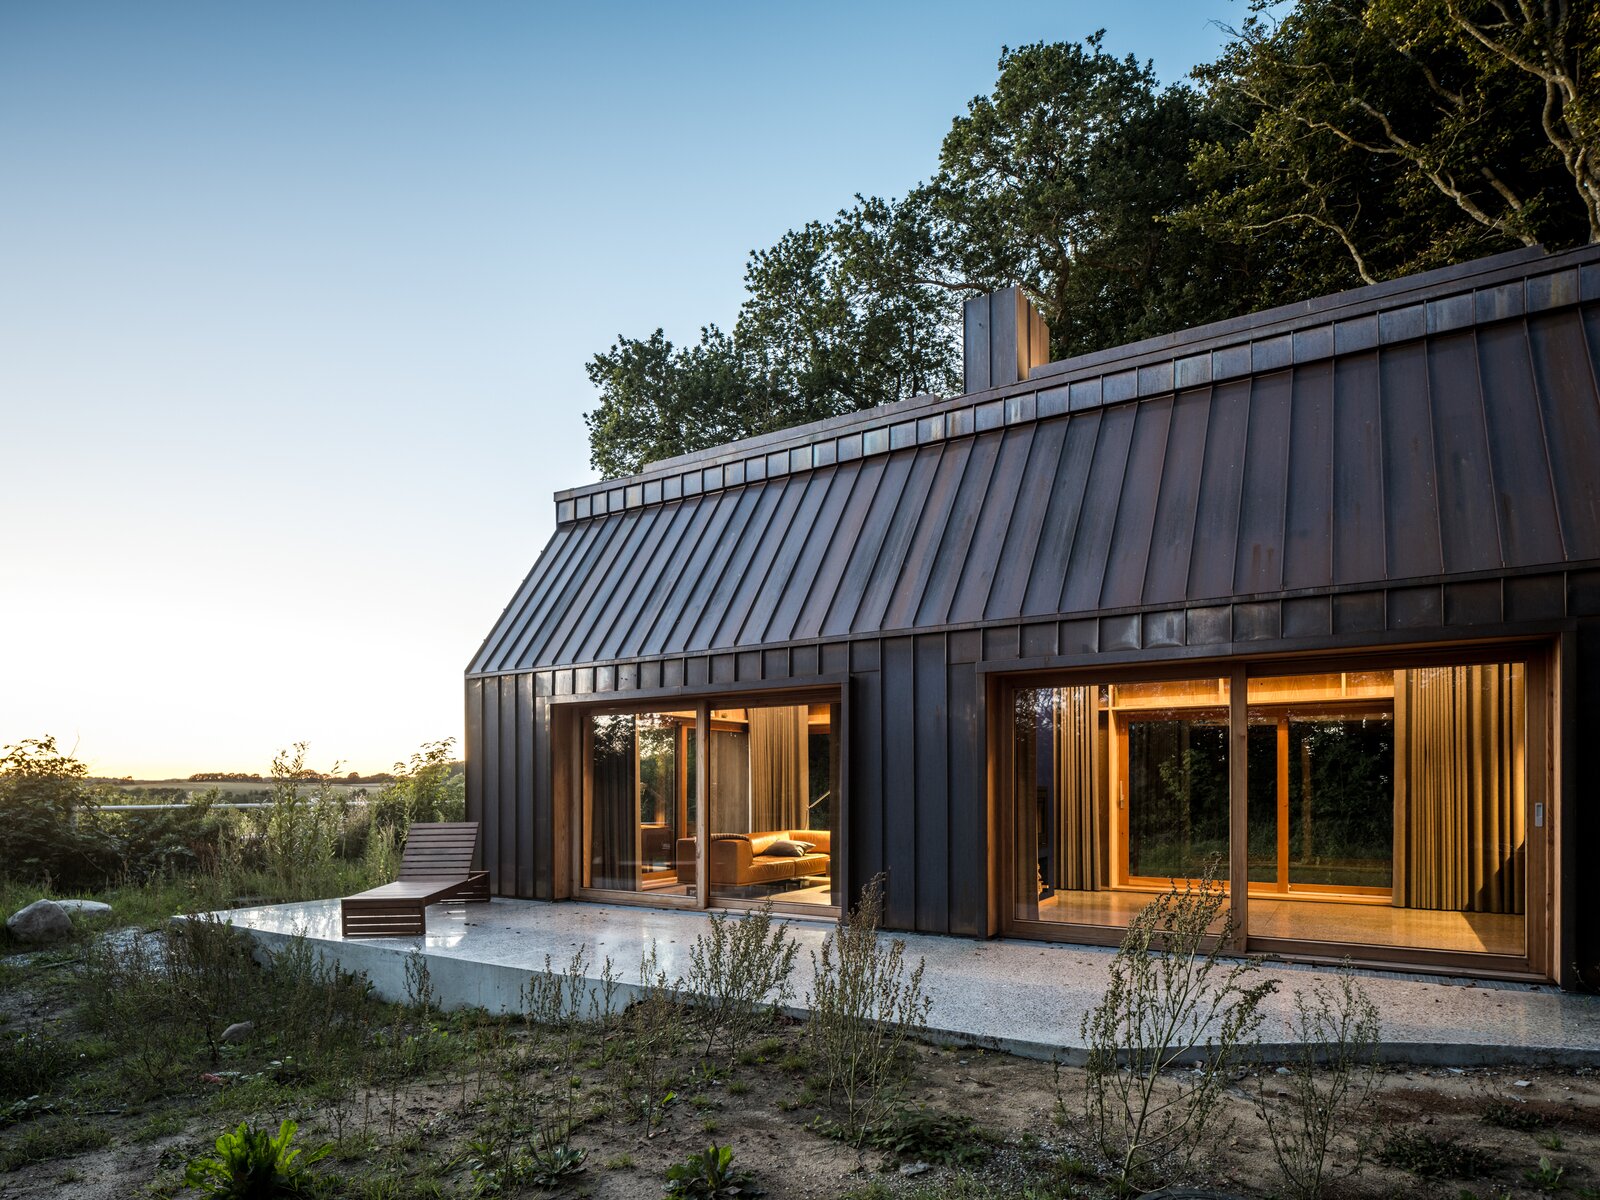 A Writer’s Copper-Clad Live/Work Space Blends Into the Forest in Denmark